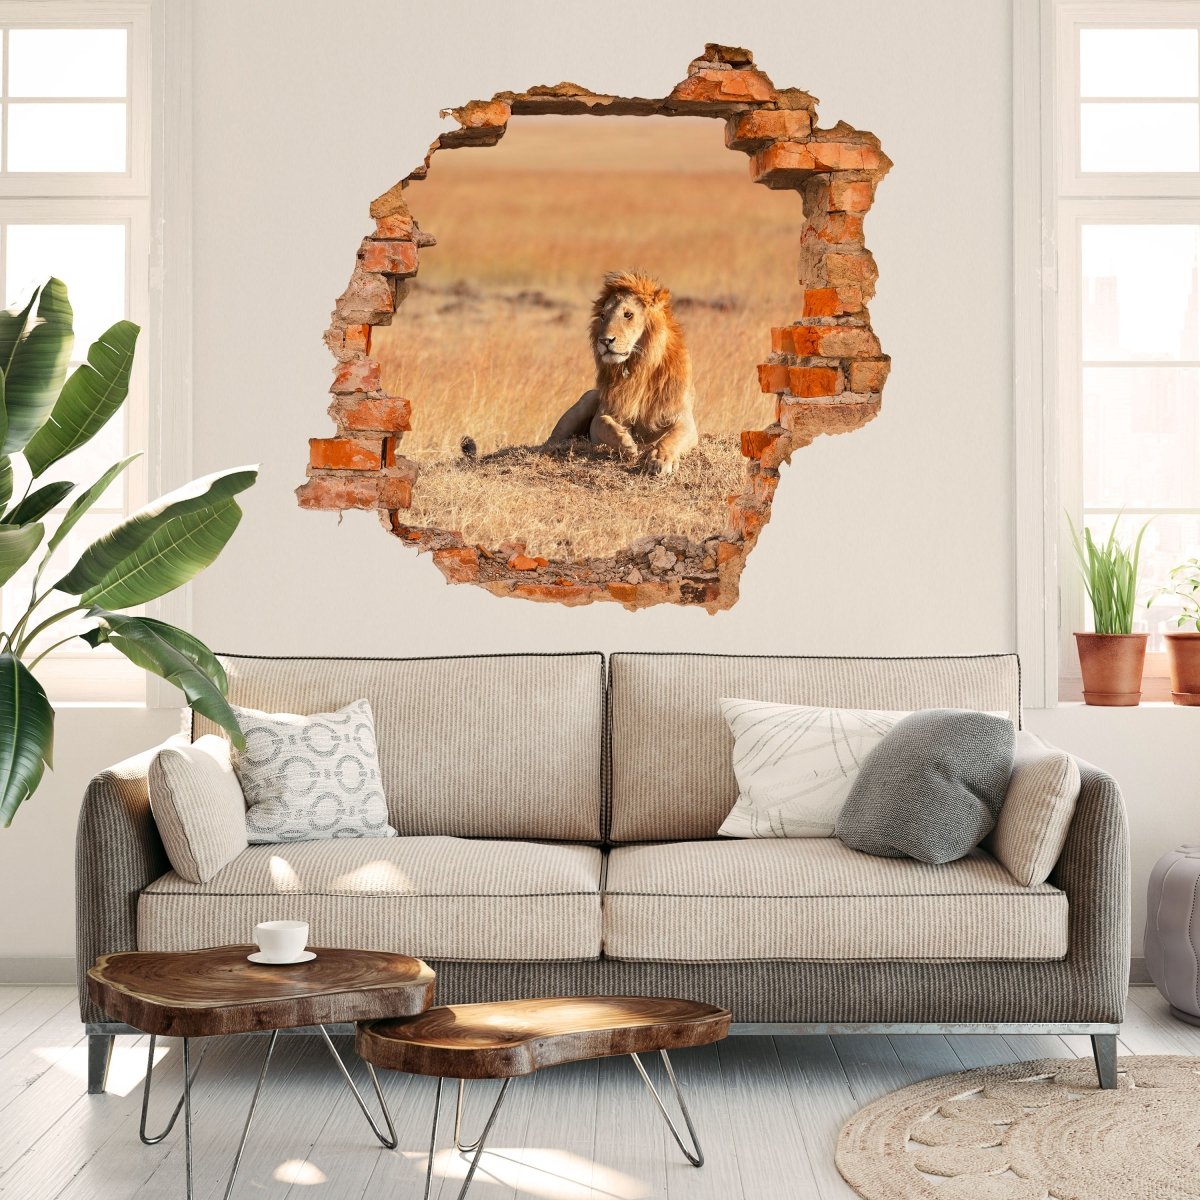 3D Wall Sticker King of the Savannah - Wall Decal M0515